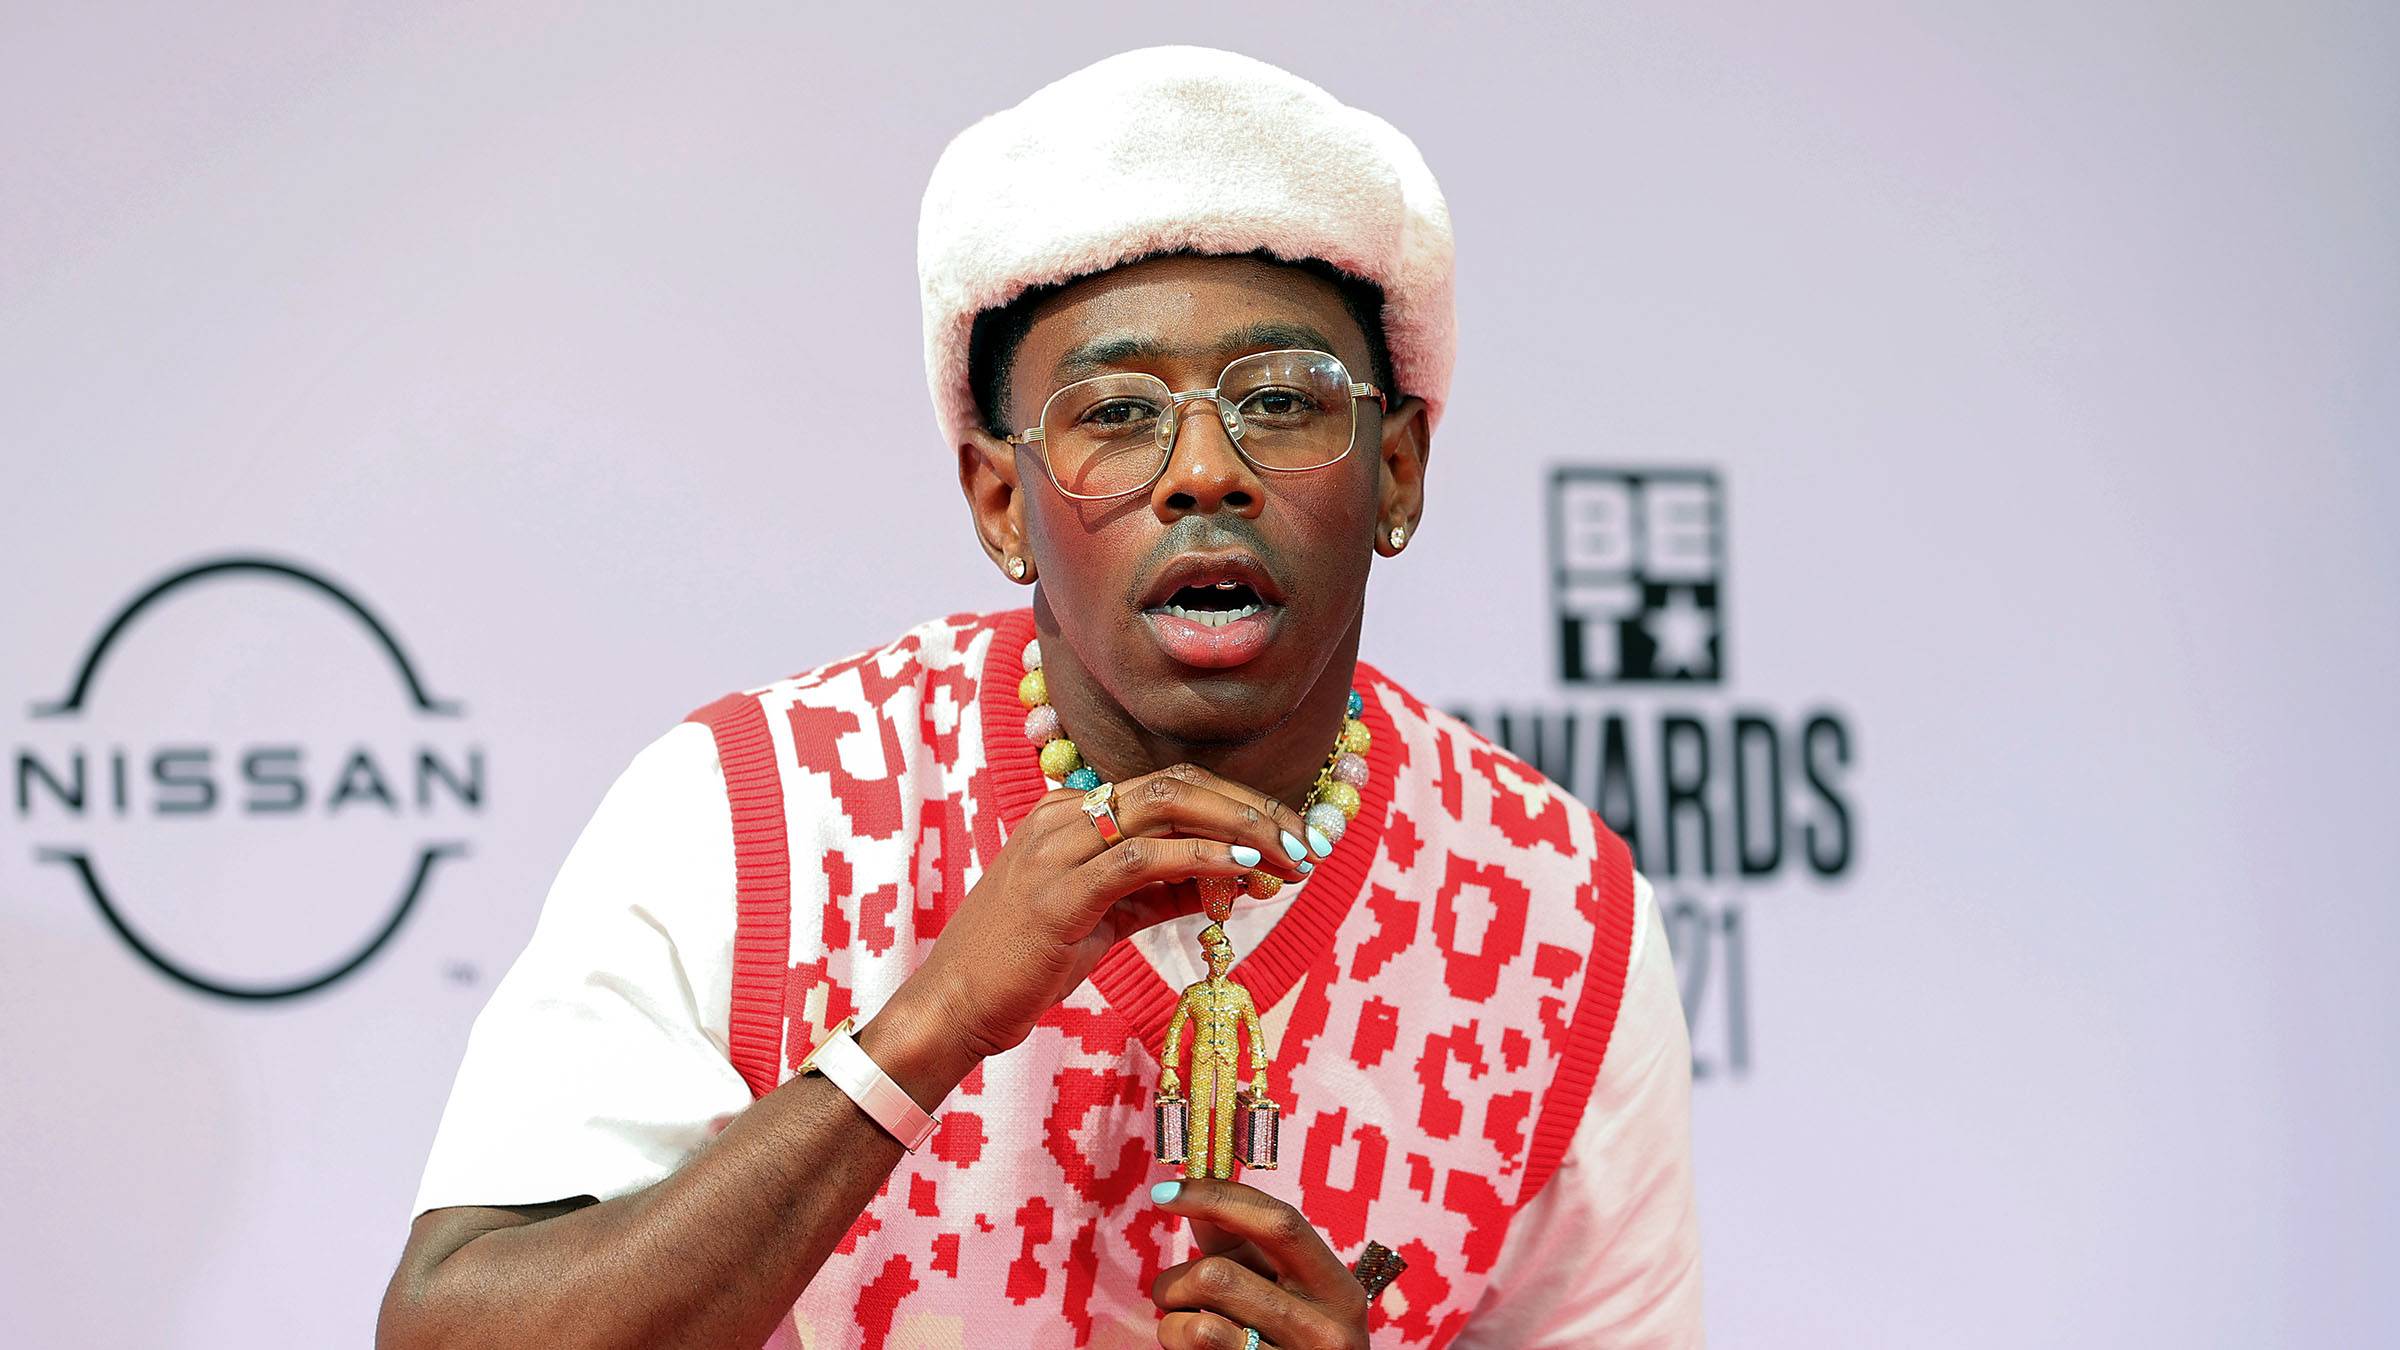 Twitter Reacts to Tyler, the Creator's Grammys Performance